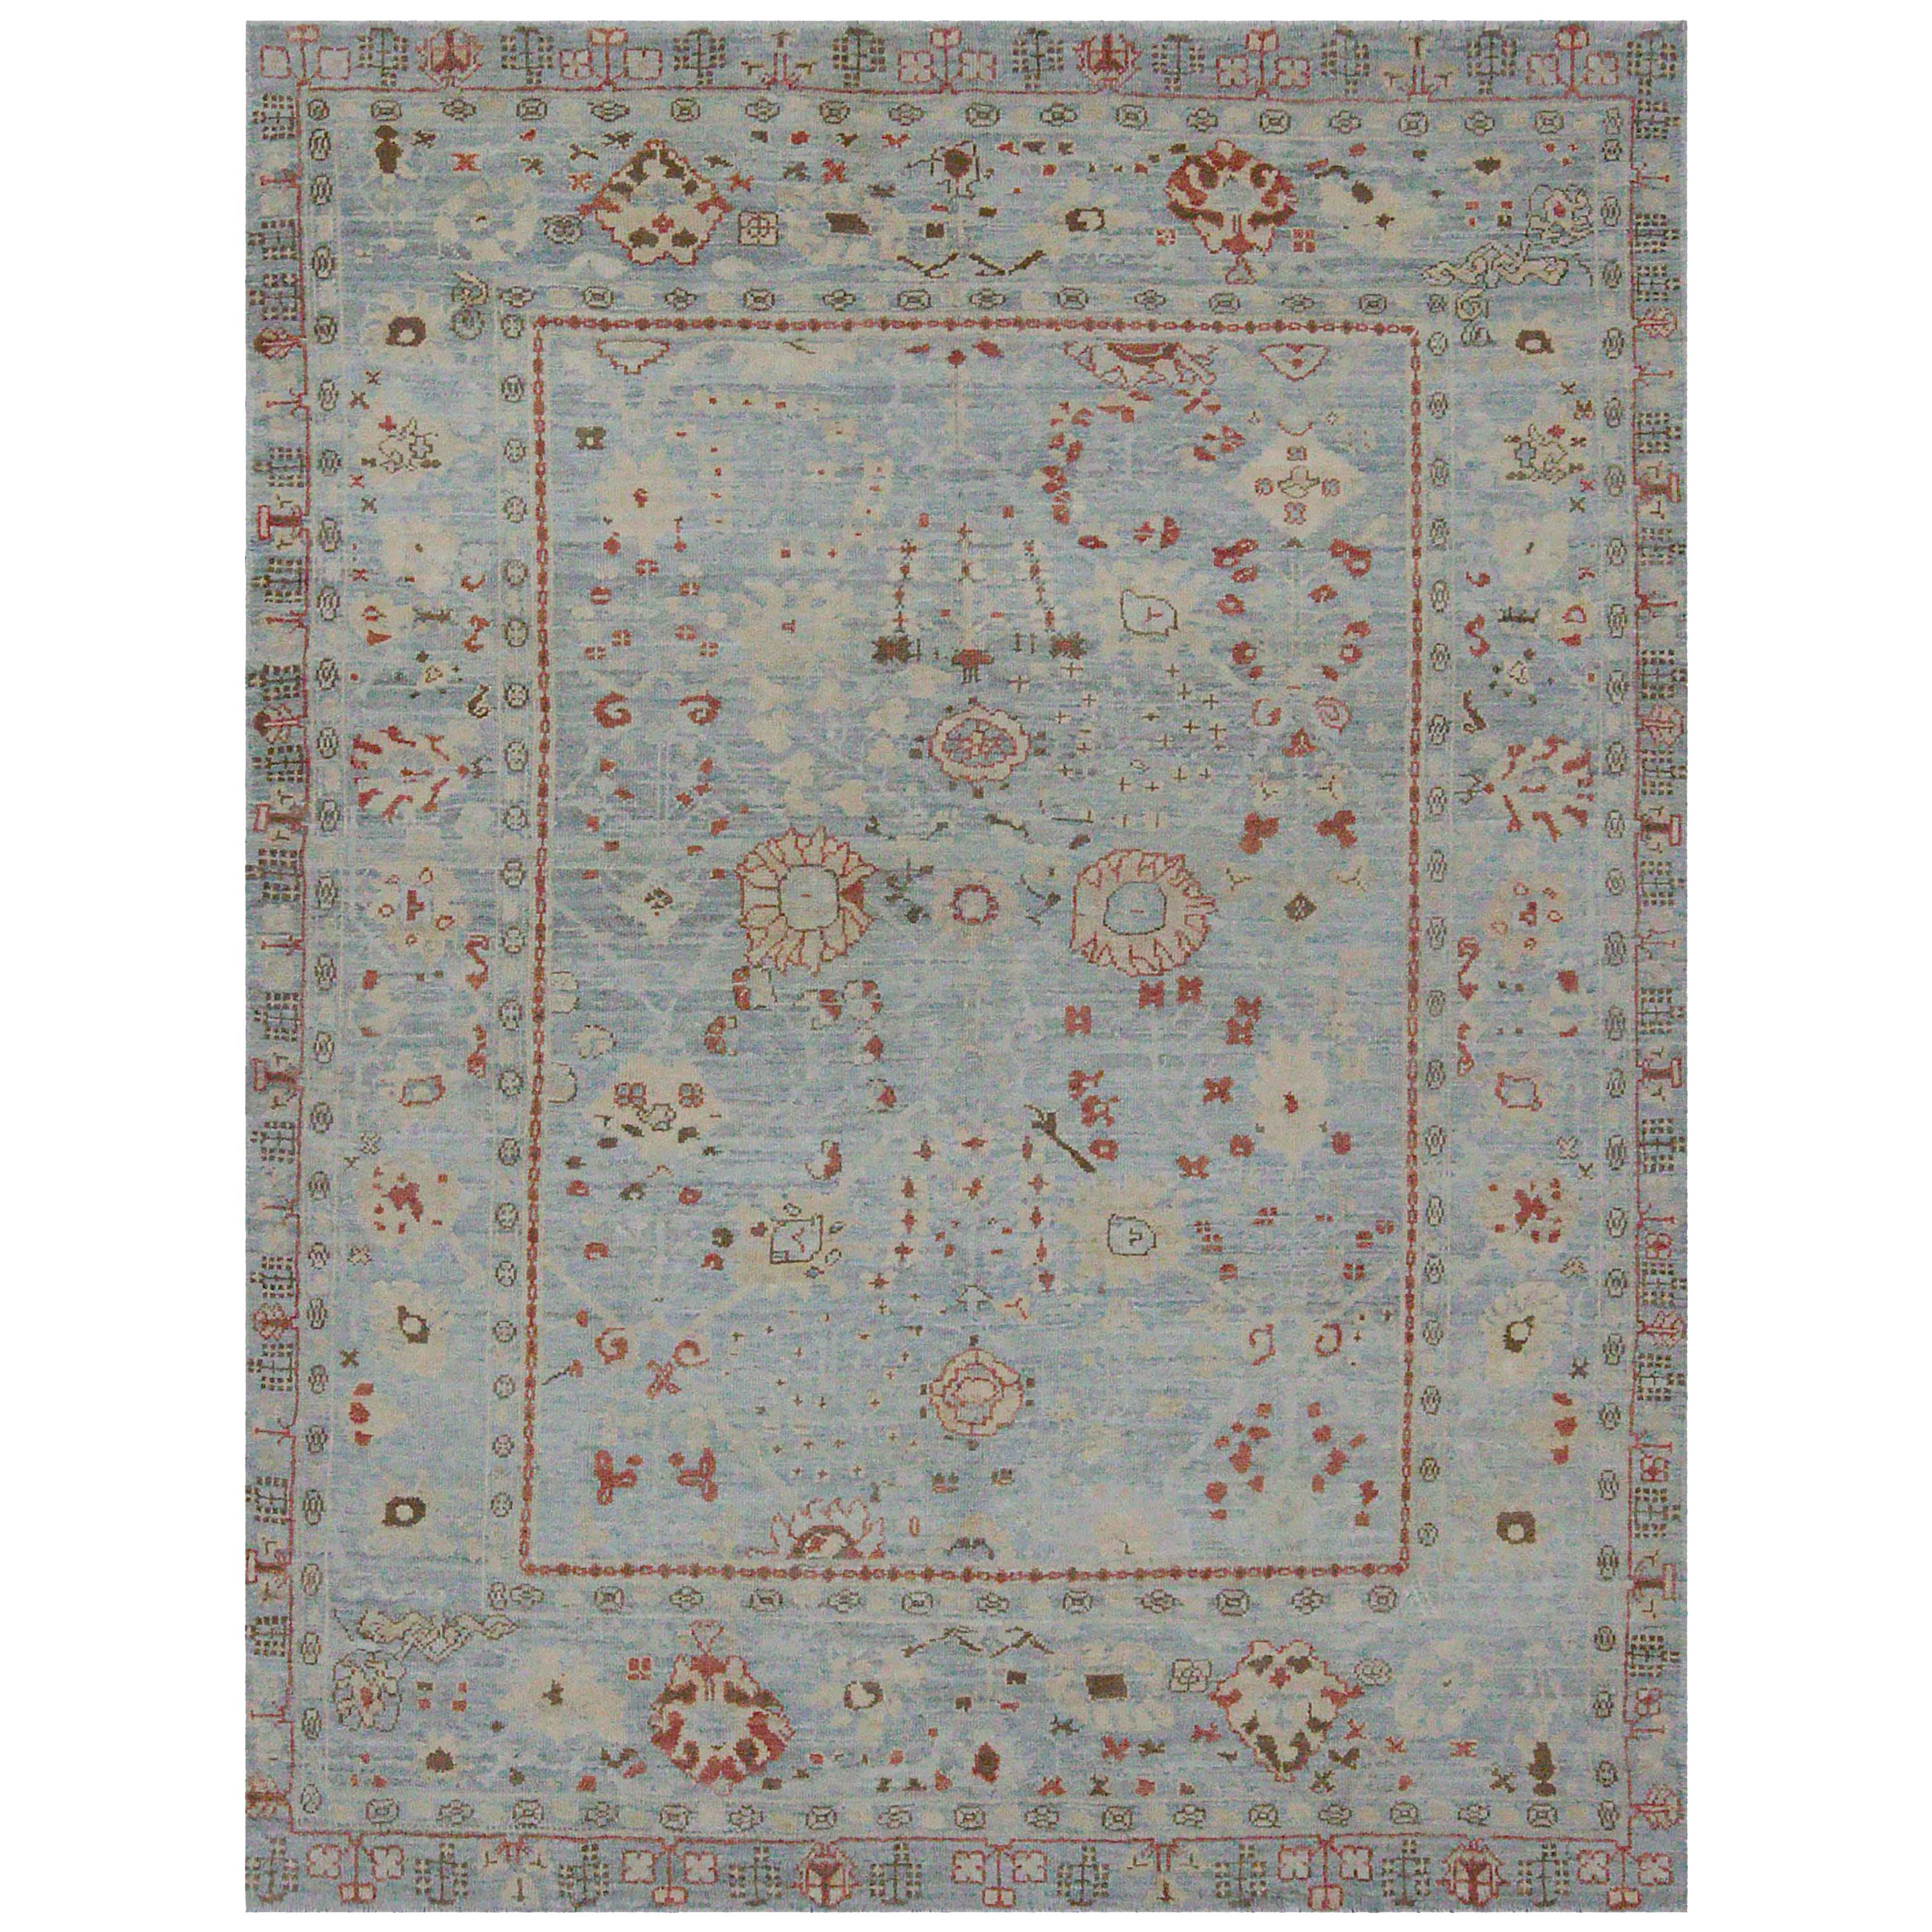 New Turkish Oushak Rug with Ivory and Red Floral Details on Blue Field